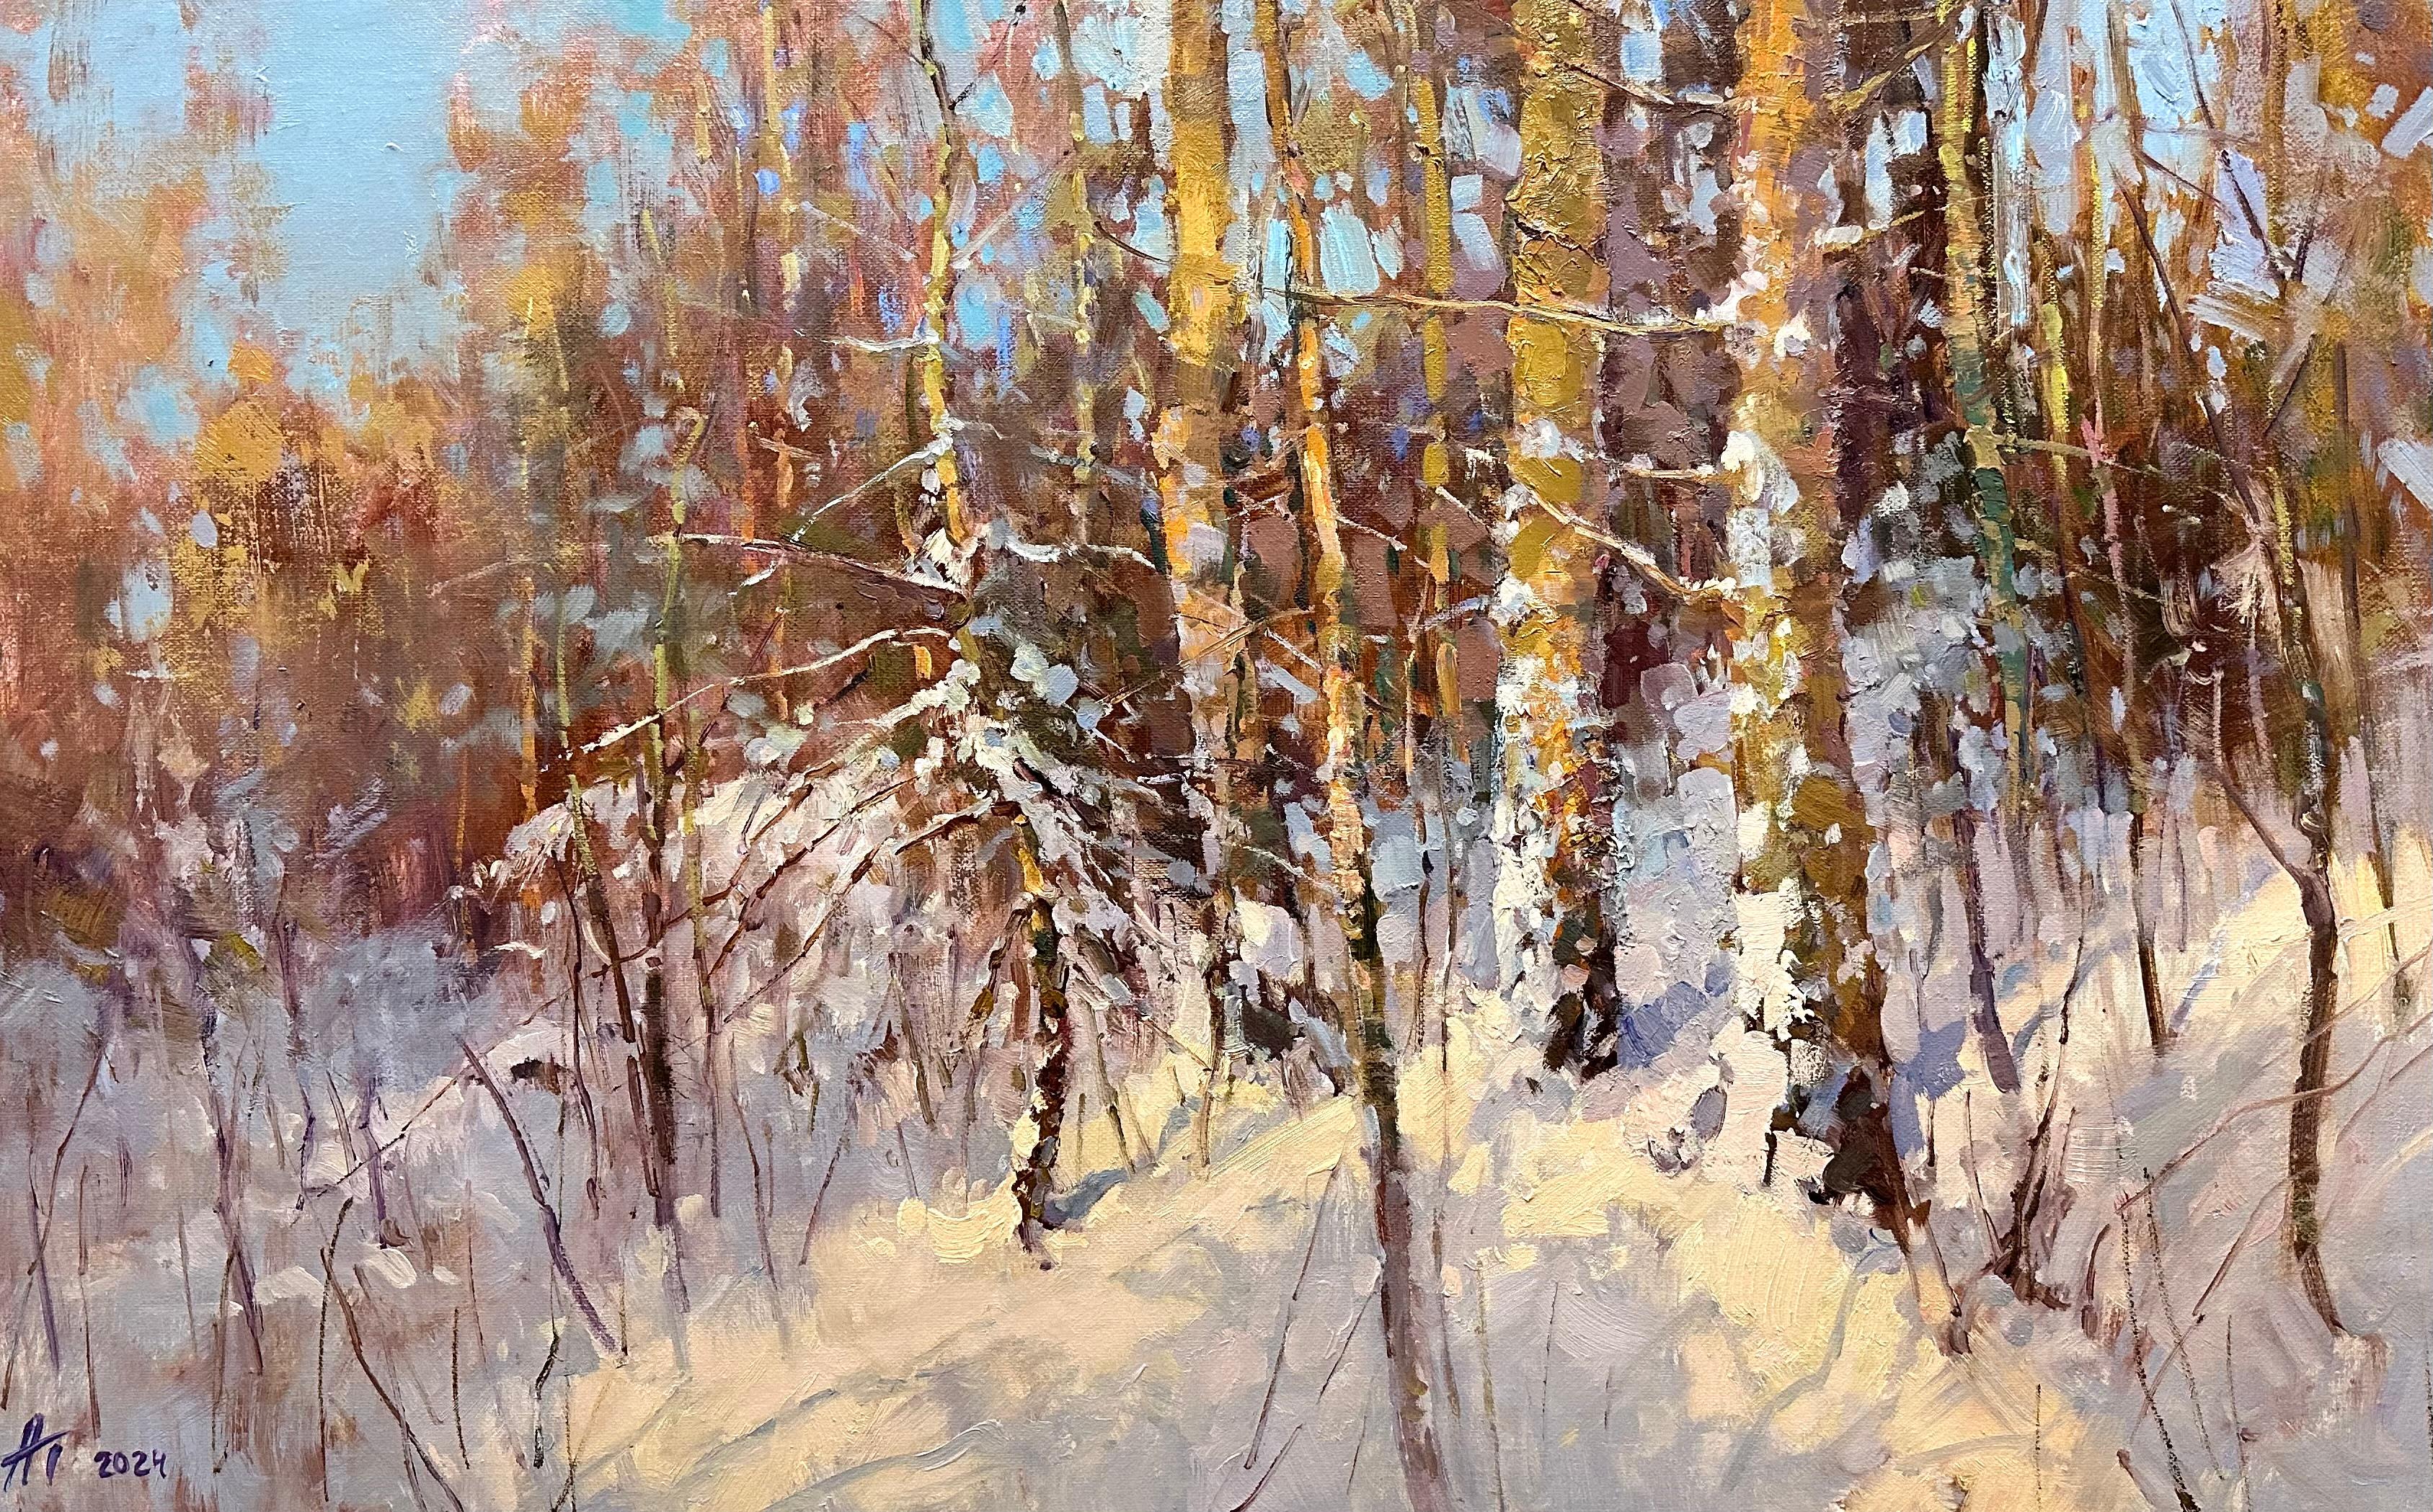 "Winter Forest" is a painting where the winter forest is enveloped in the mystical light of the last rays of the setting sun. Thick snow rests on the branches of the trees, resembling a soft blanket, refracting light in warm hues. The evening sky